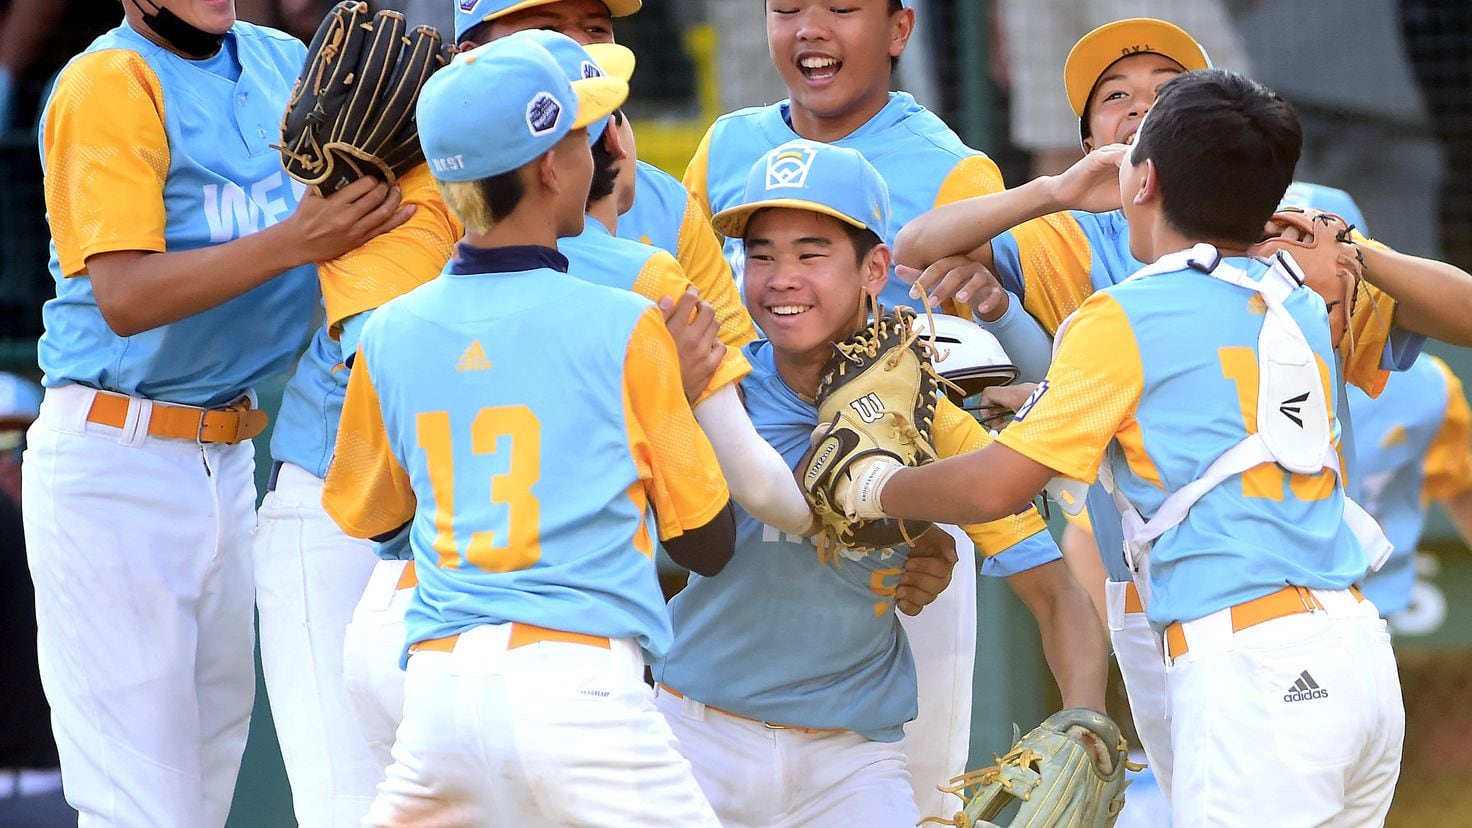 2021 Little League World Series: Scores, stats, history and more